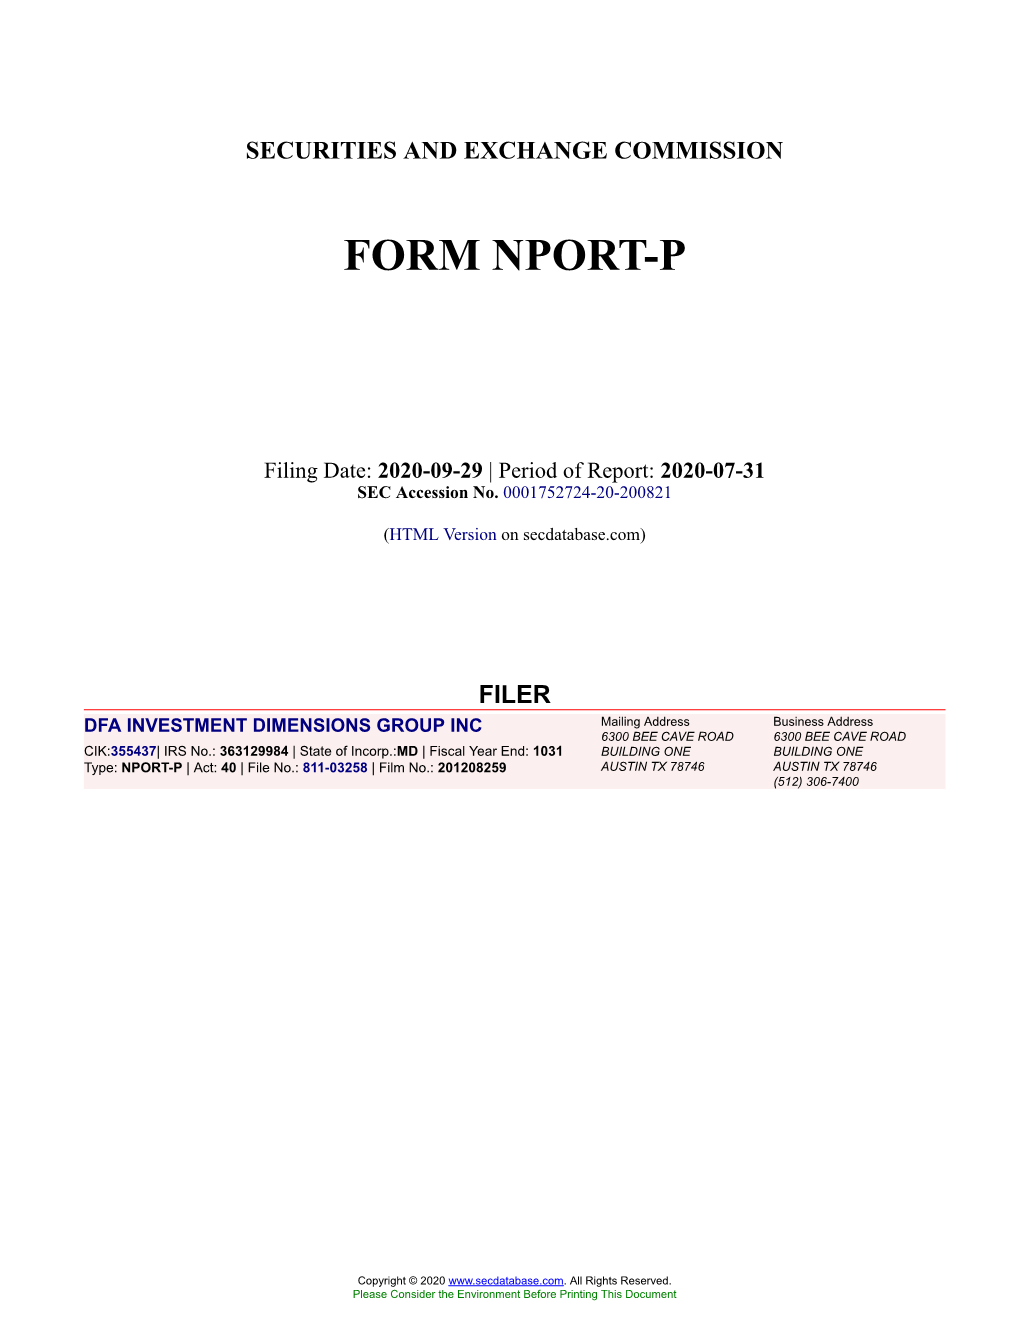 DFA INVESTMENT DIMENSIONS GROUP INC Form NPORT-P Filed 2020-09-29